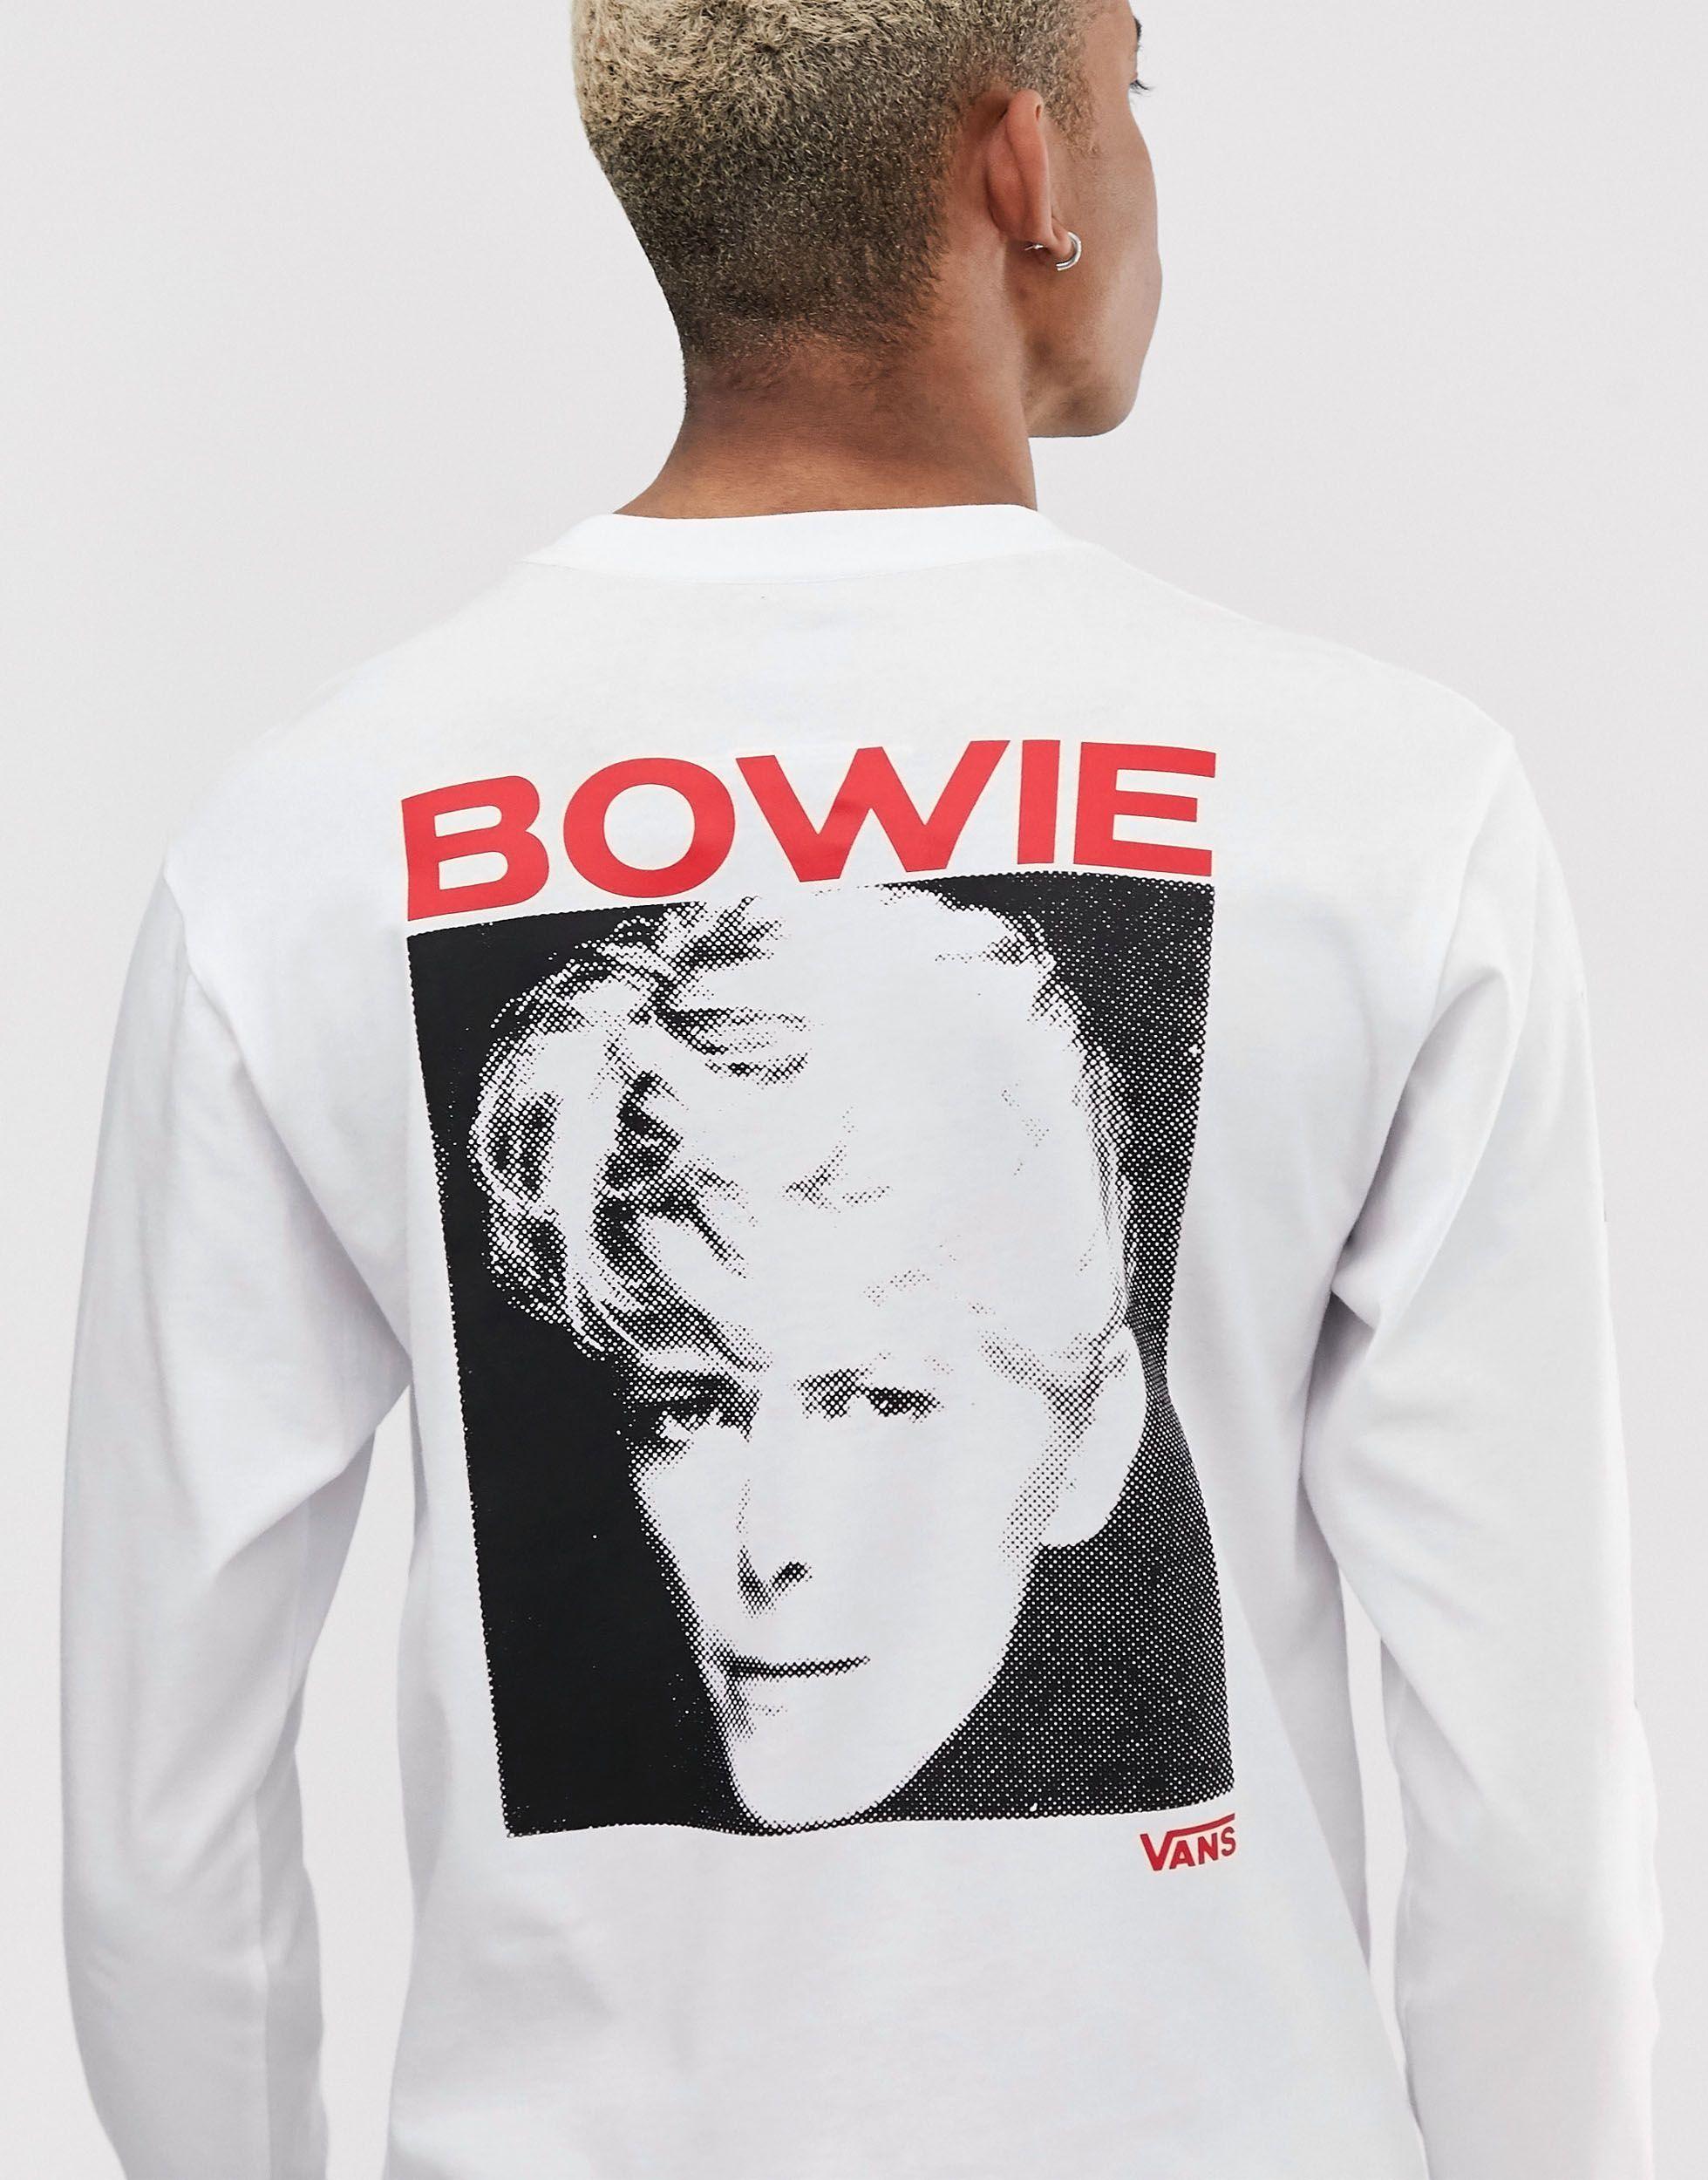 Vans Cotton X David Bowie Long Sleeve Top With Back Print in White for Men  - Lyst